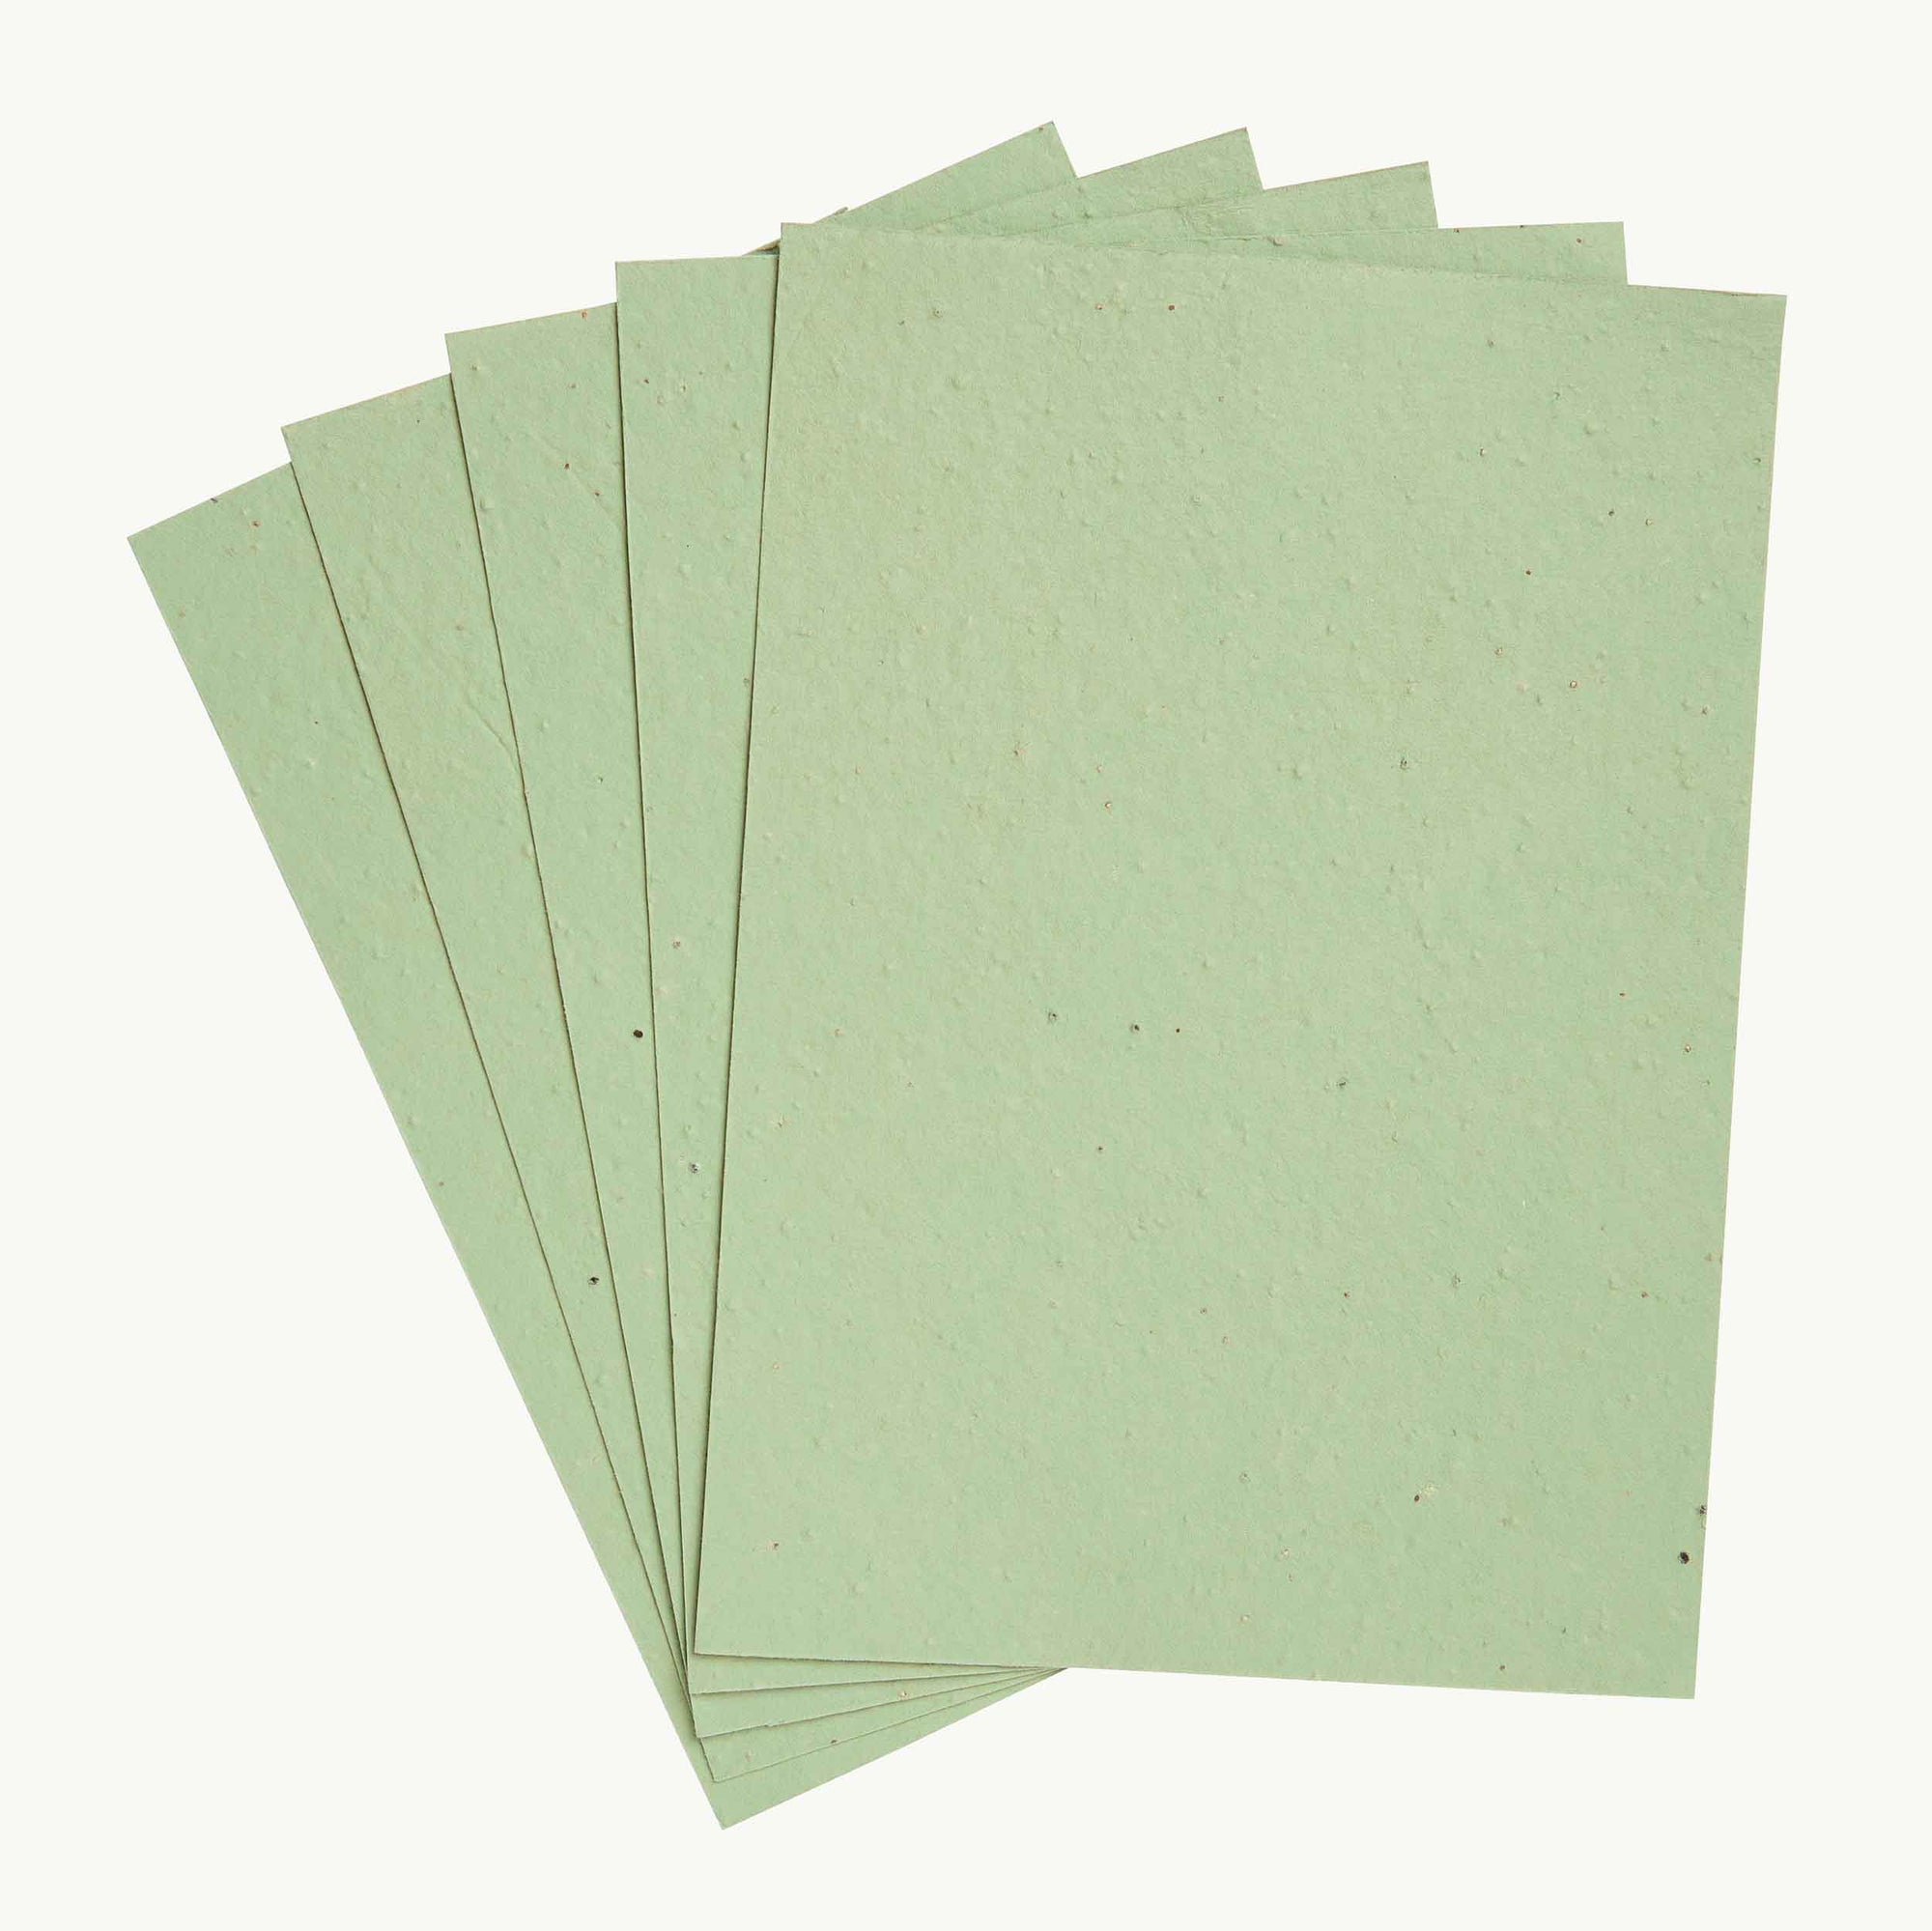 Olive green mixed wildflower seed paper that grows into a plant